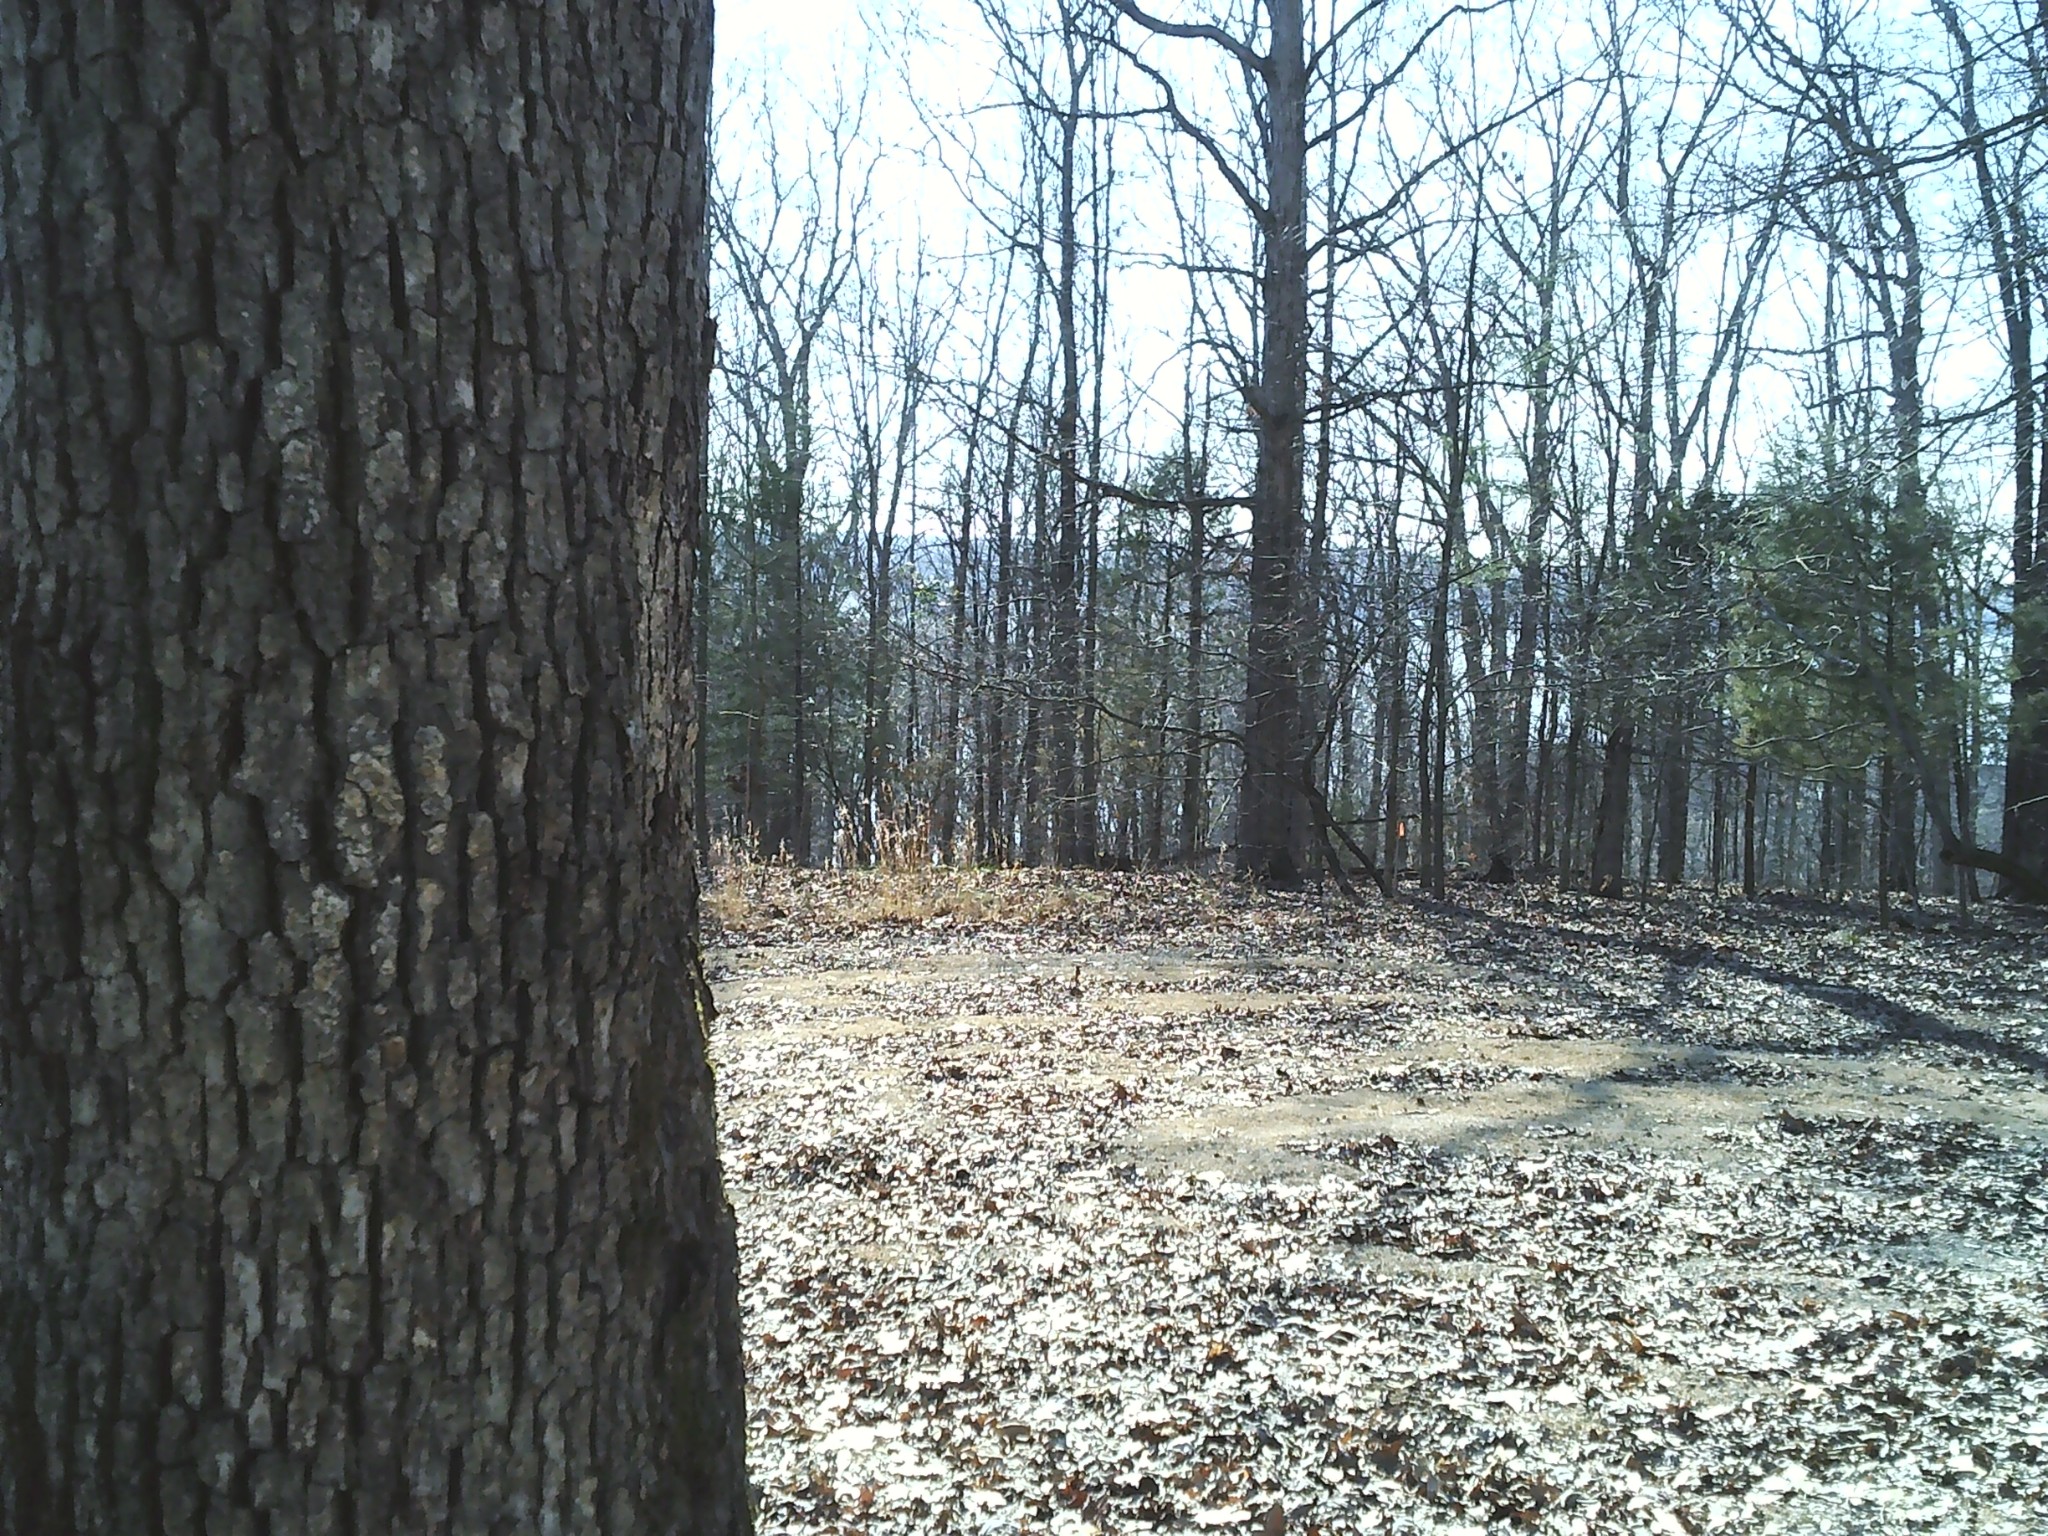 a view of a backyard with trees